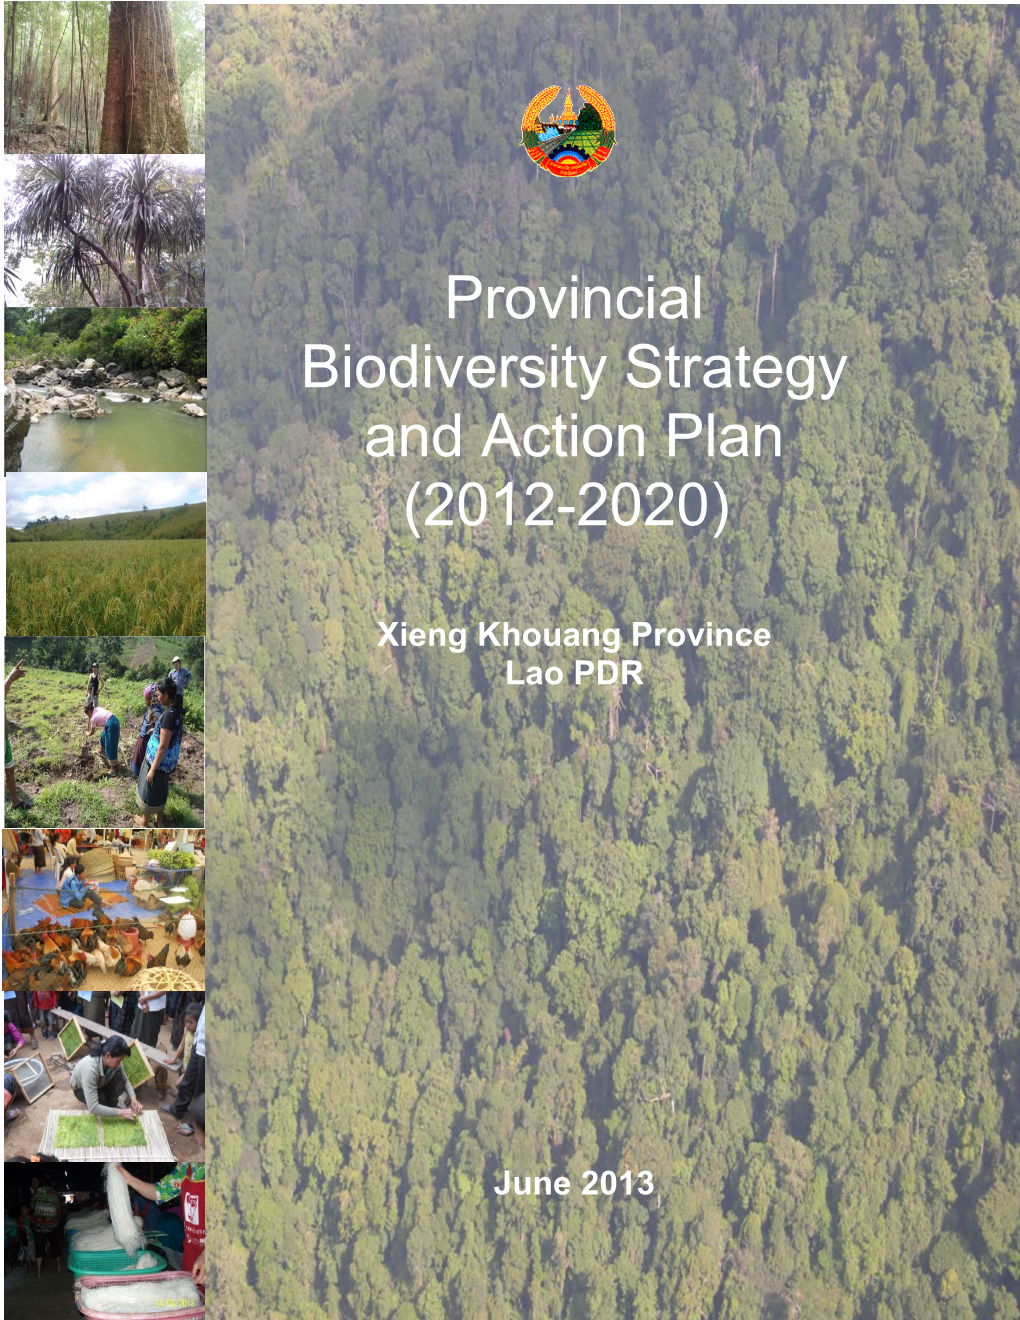 Provincial Biodiversity Strategy and Action Plan (2012-2020)